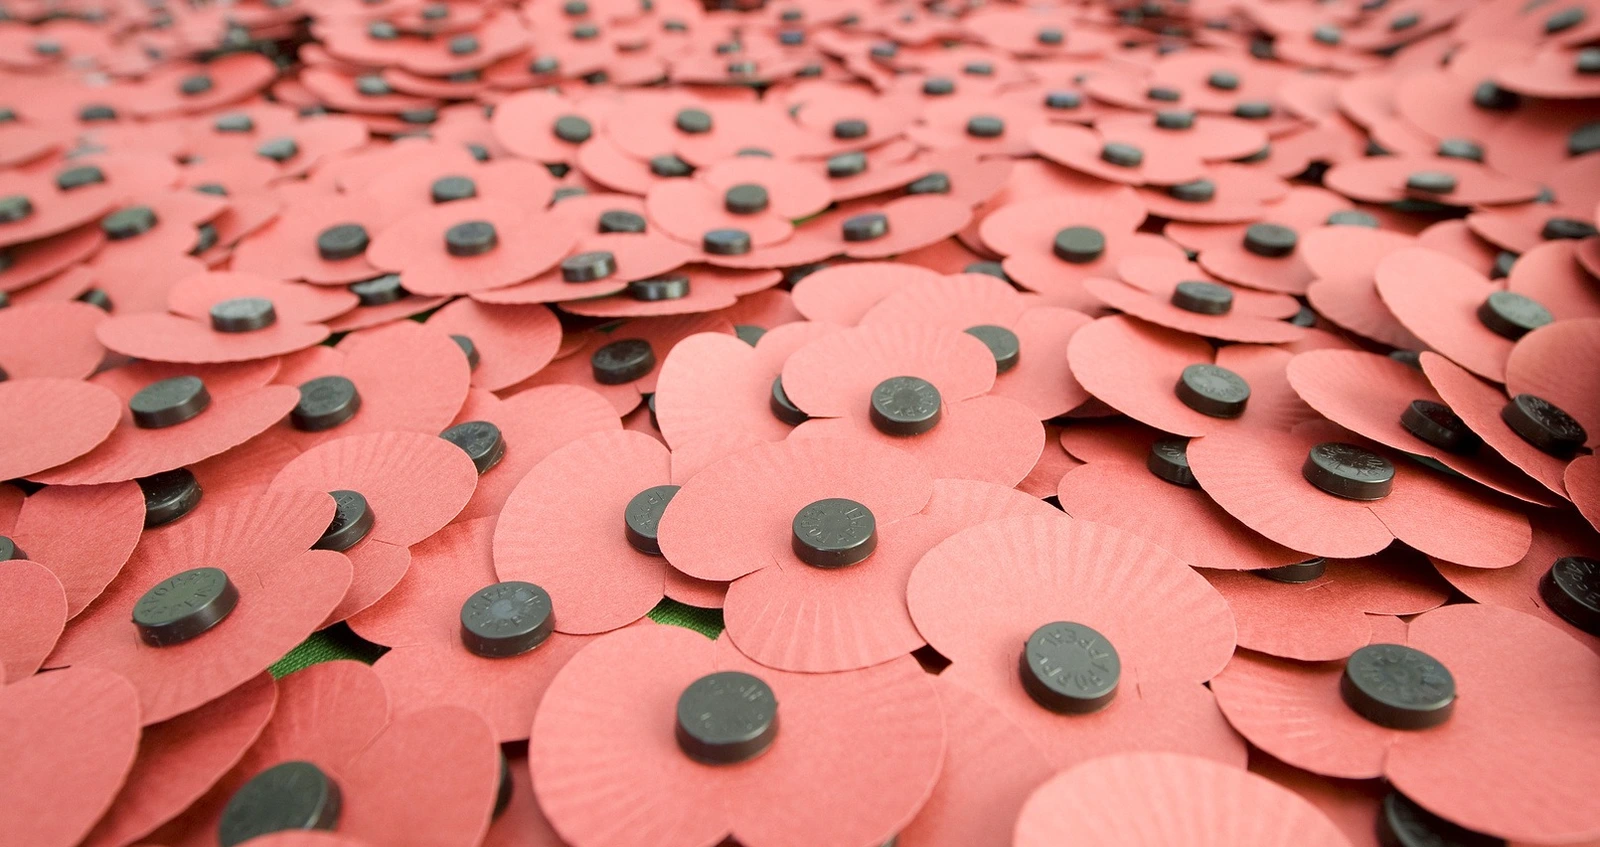 5 Quick Facts About Remembrance Day